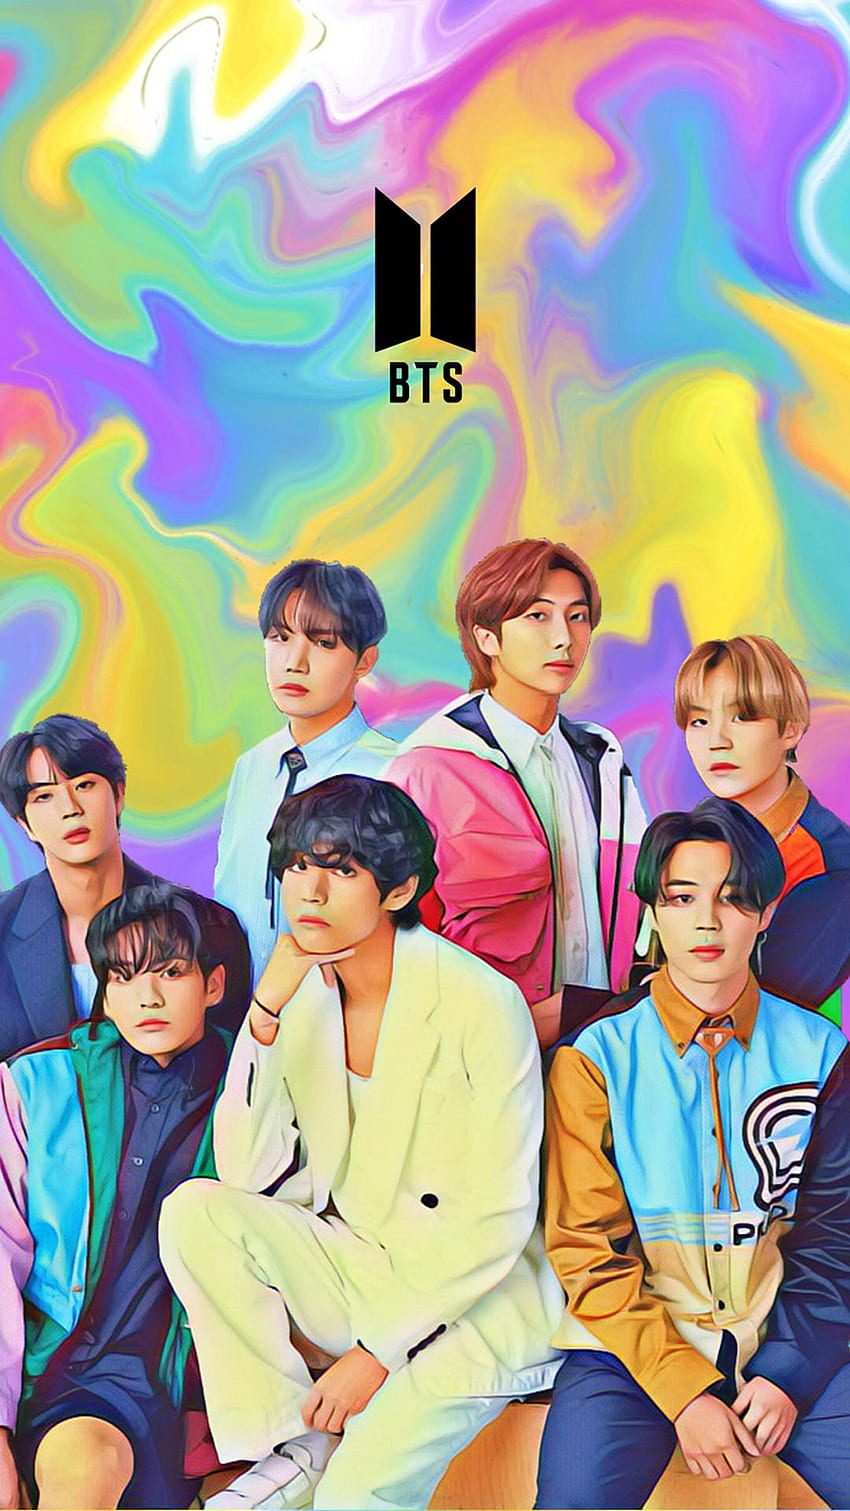 BTS - BTS Group For Mobile, BTS Cute Group HD phone wallpaper